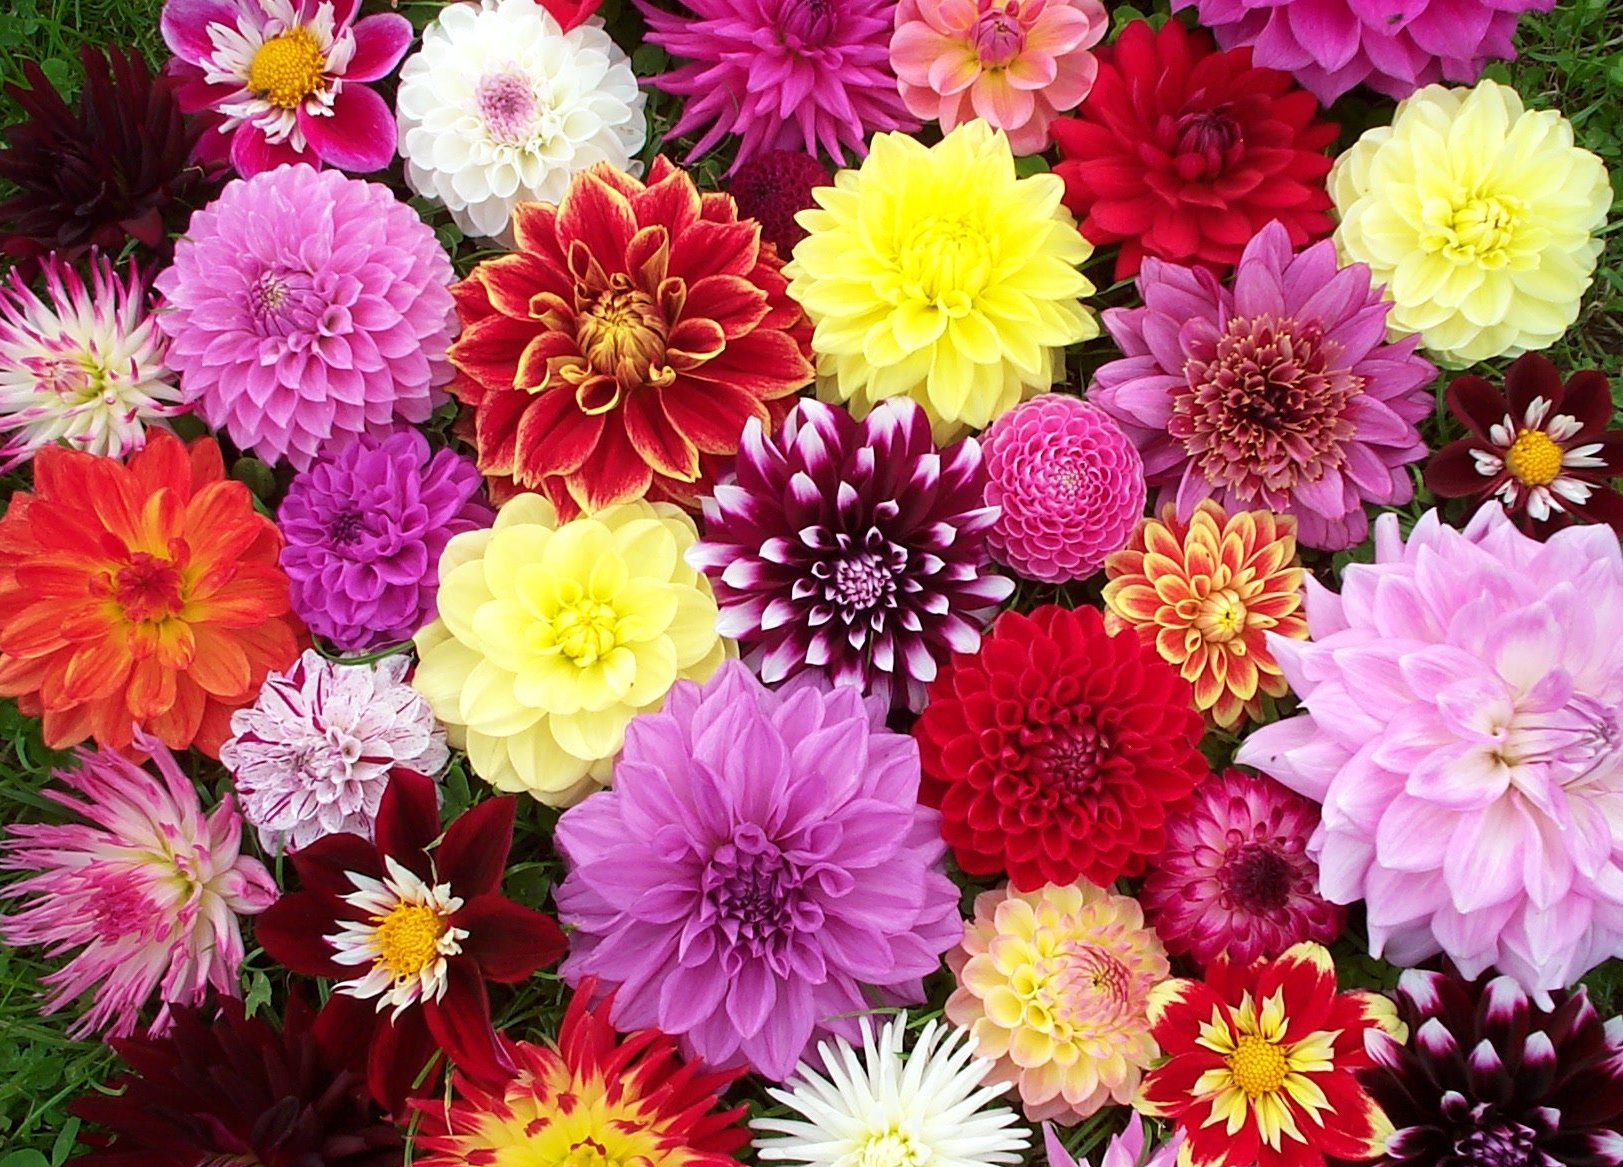 Amazing Dahlia Pictures & Backgrounds